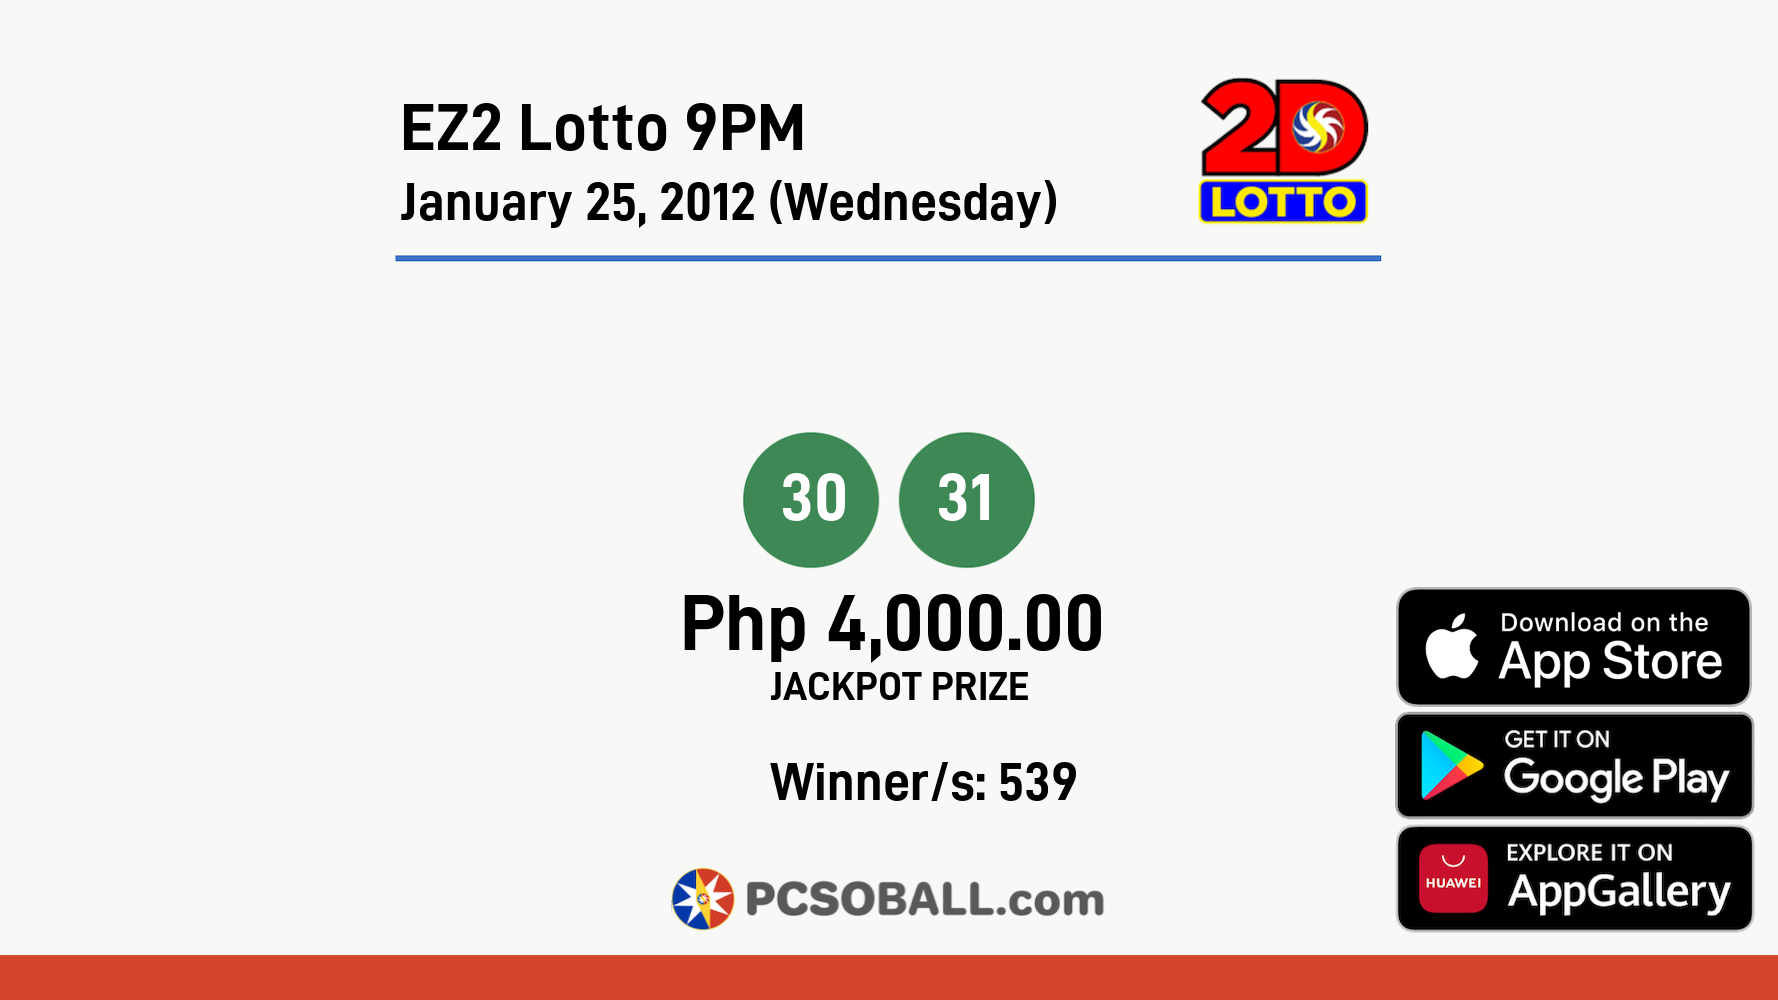 EZ2 Lotto 9PM January 25, 2012 (Wednesday) Result